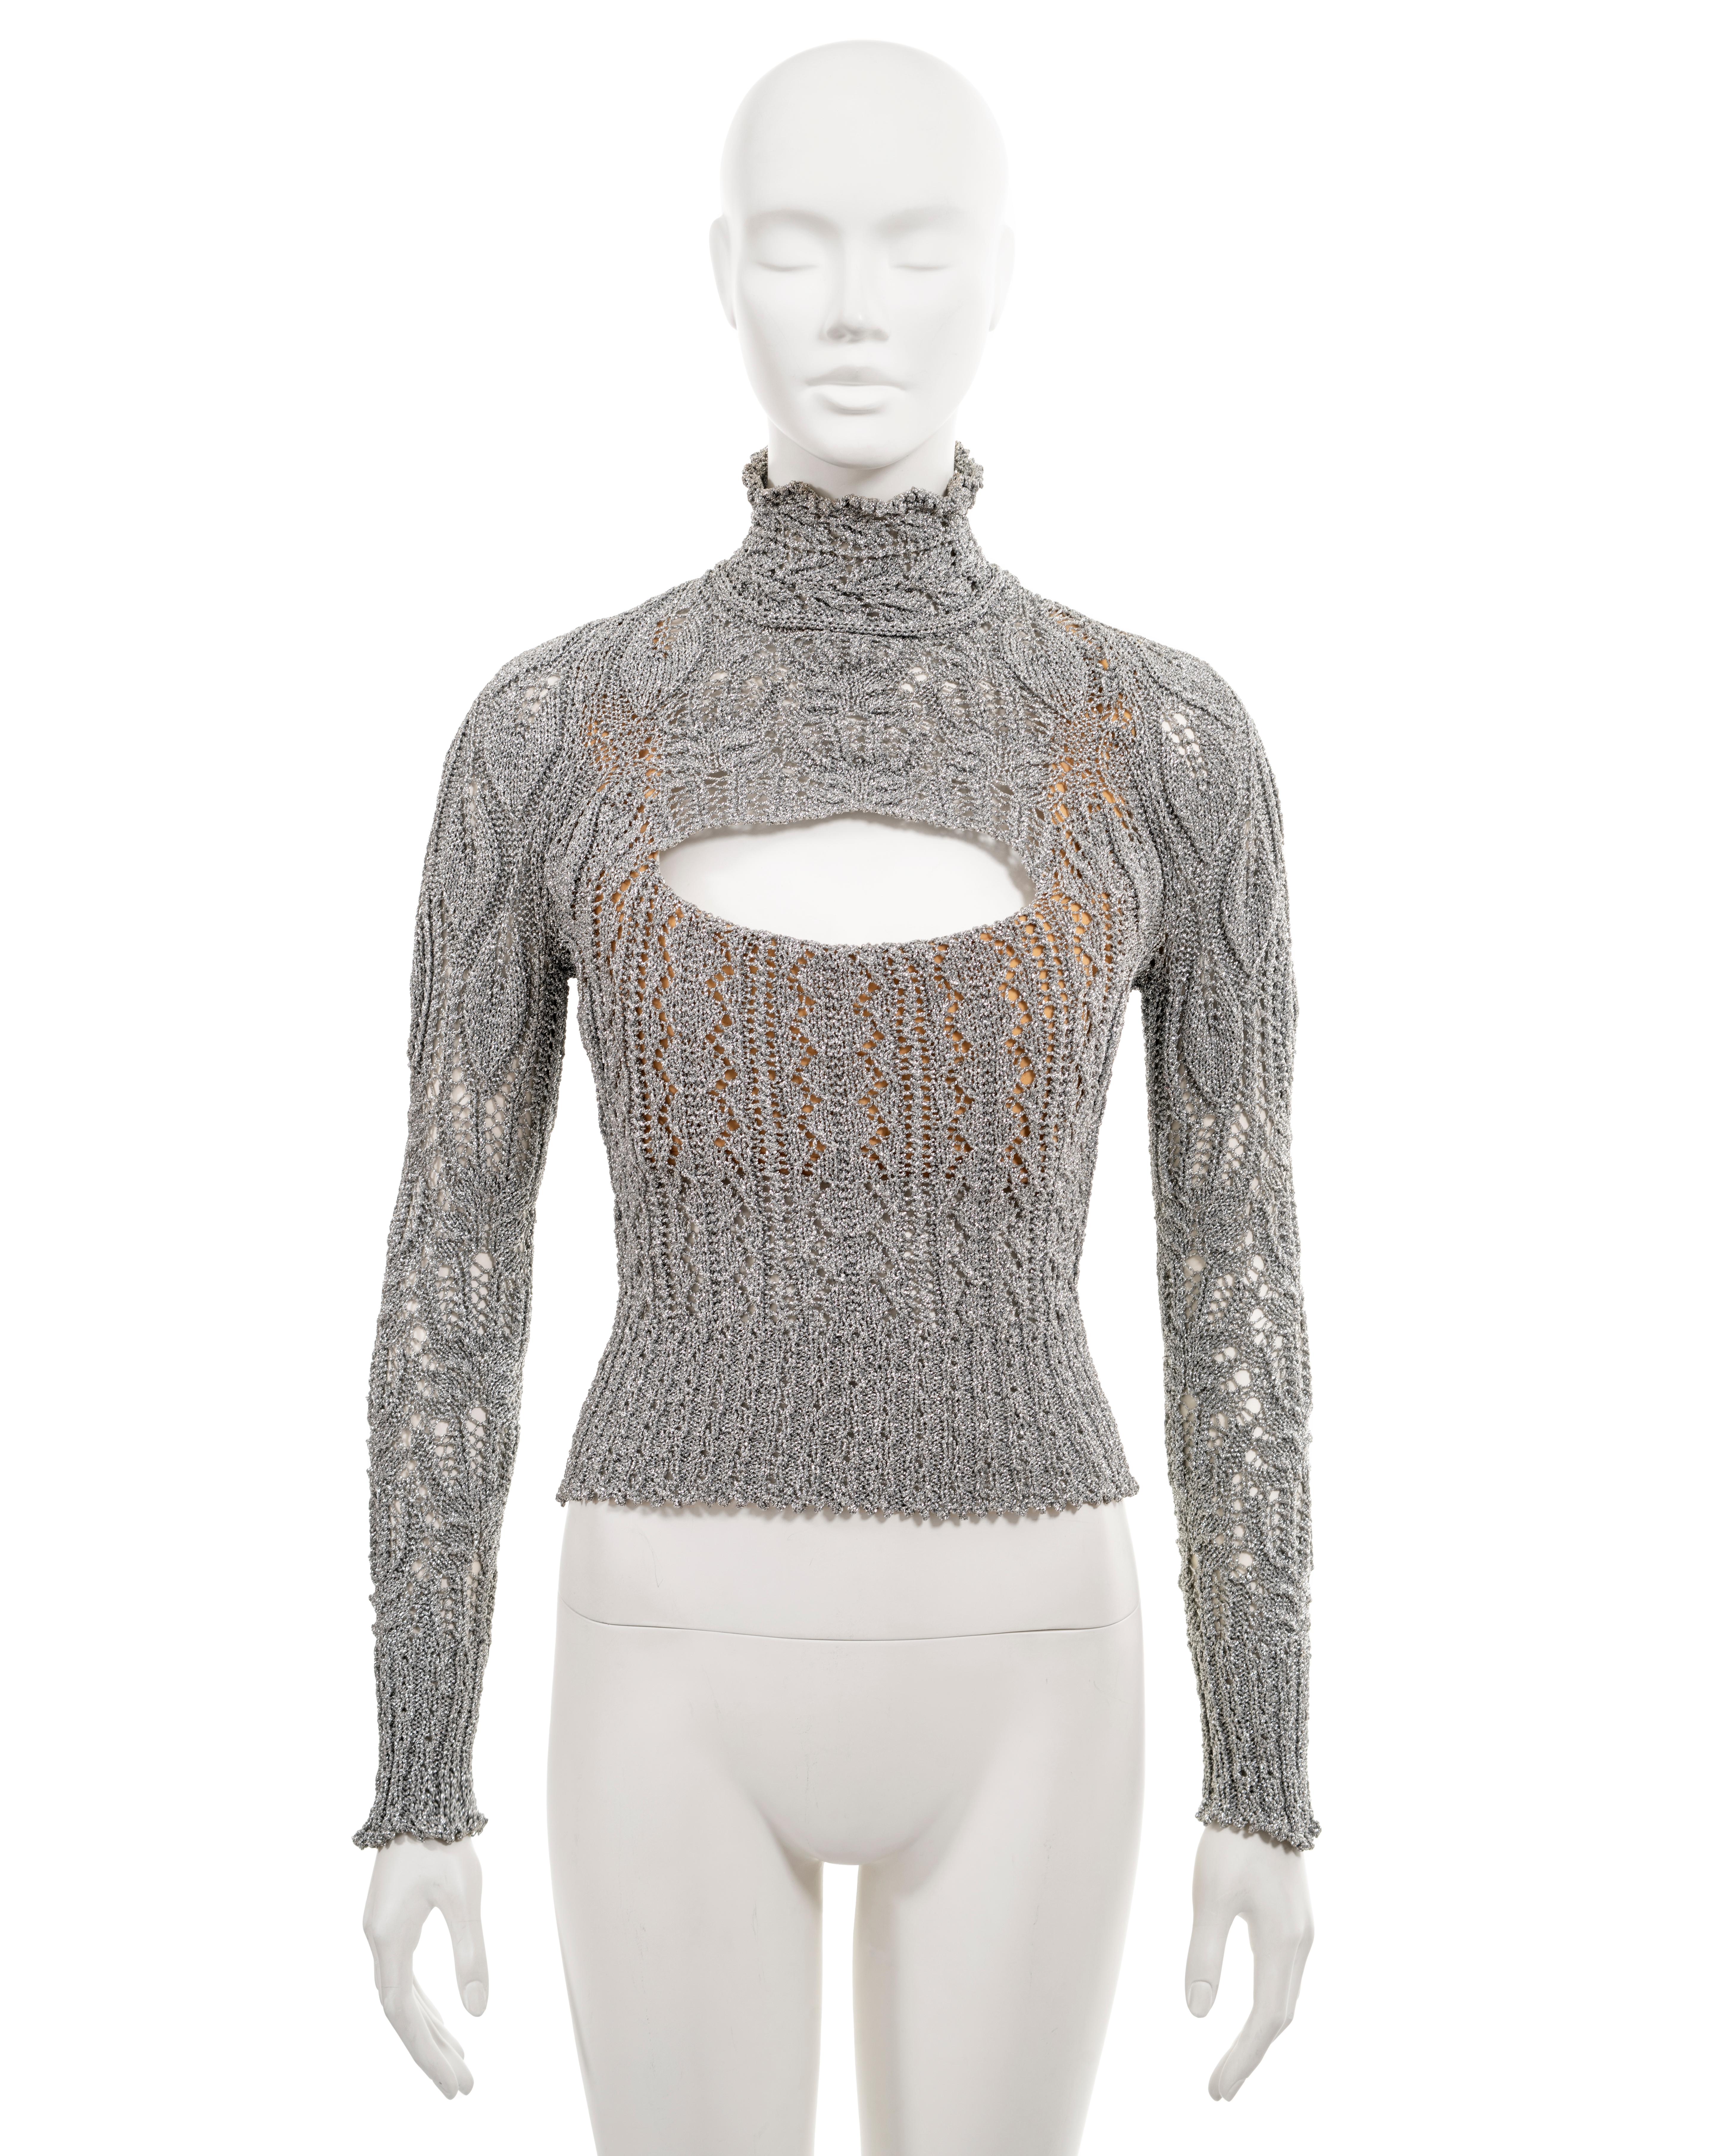 ▪ Vivienne Westwood archival corset-sweater
▪ Sold by One of a Kind Archive
▪ Fall-Winter 1993
▪ Open-knit in metallic silver yarn
▪ Built-in nude corset
▪ Cutout at the chest 
▪ High neck
▪ Long fitted sleeves 
▪ Size 'Large' (runs smaller)
▪ Made